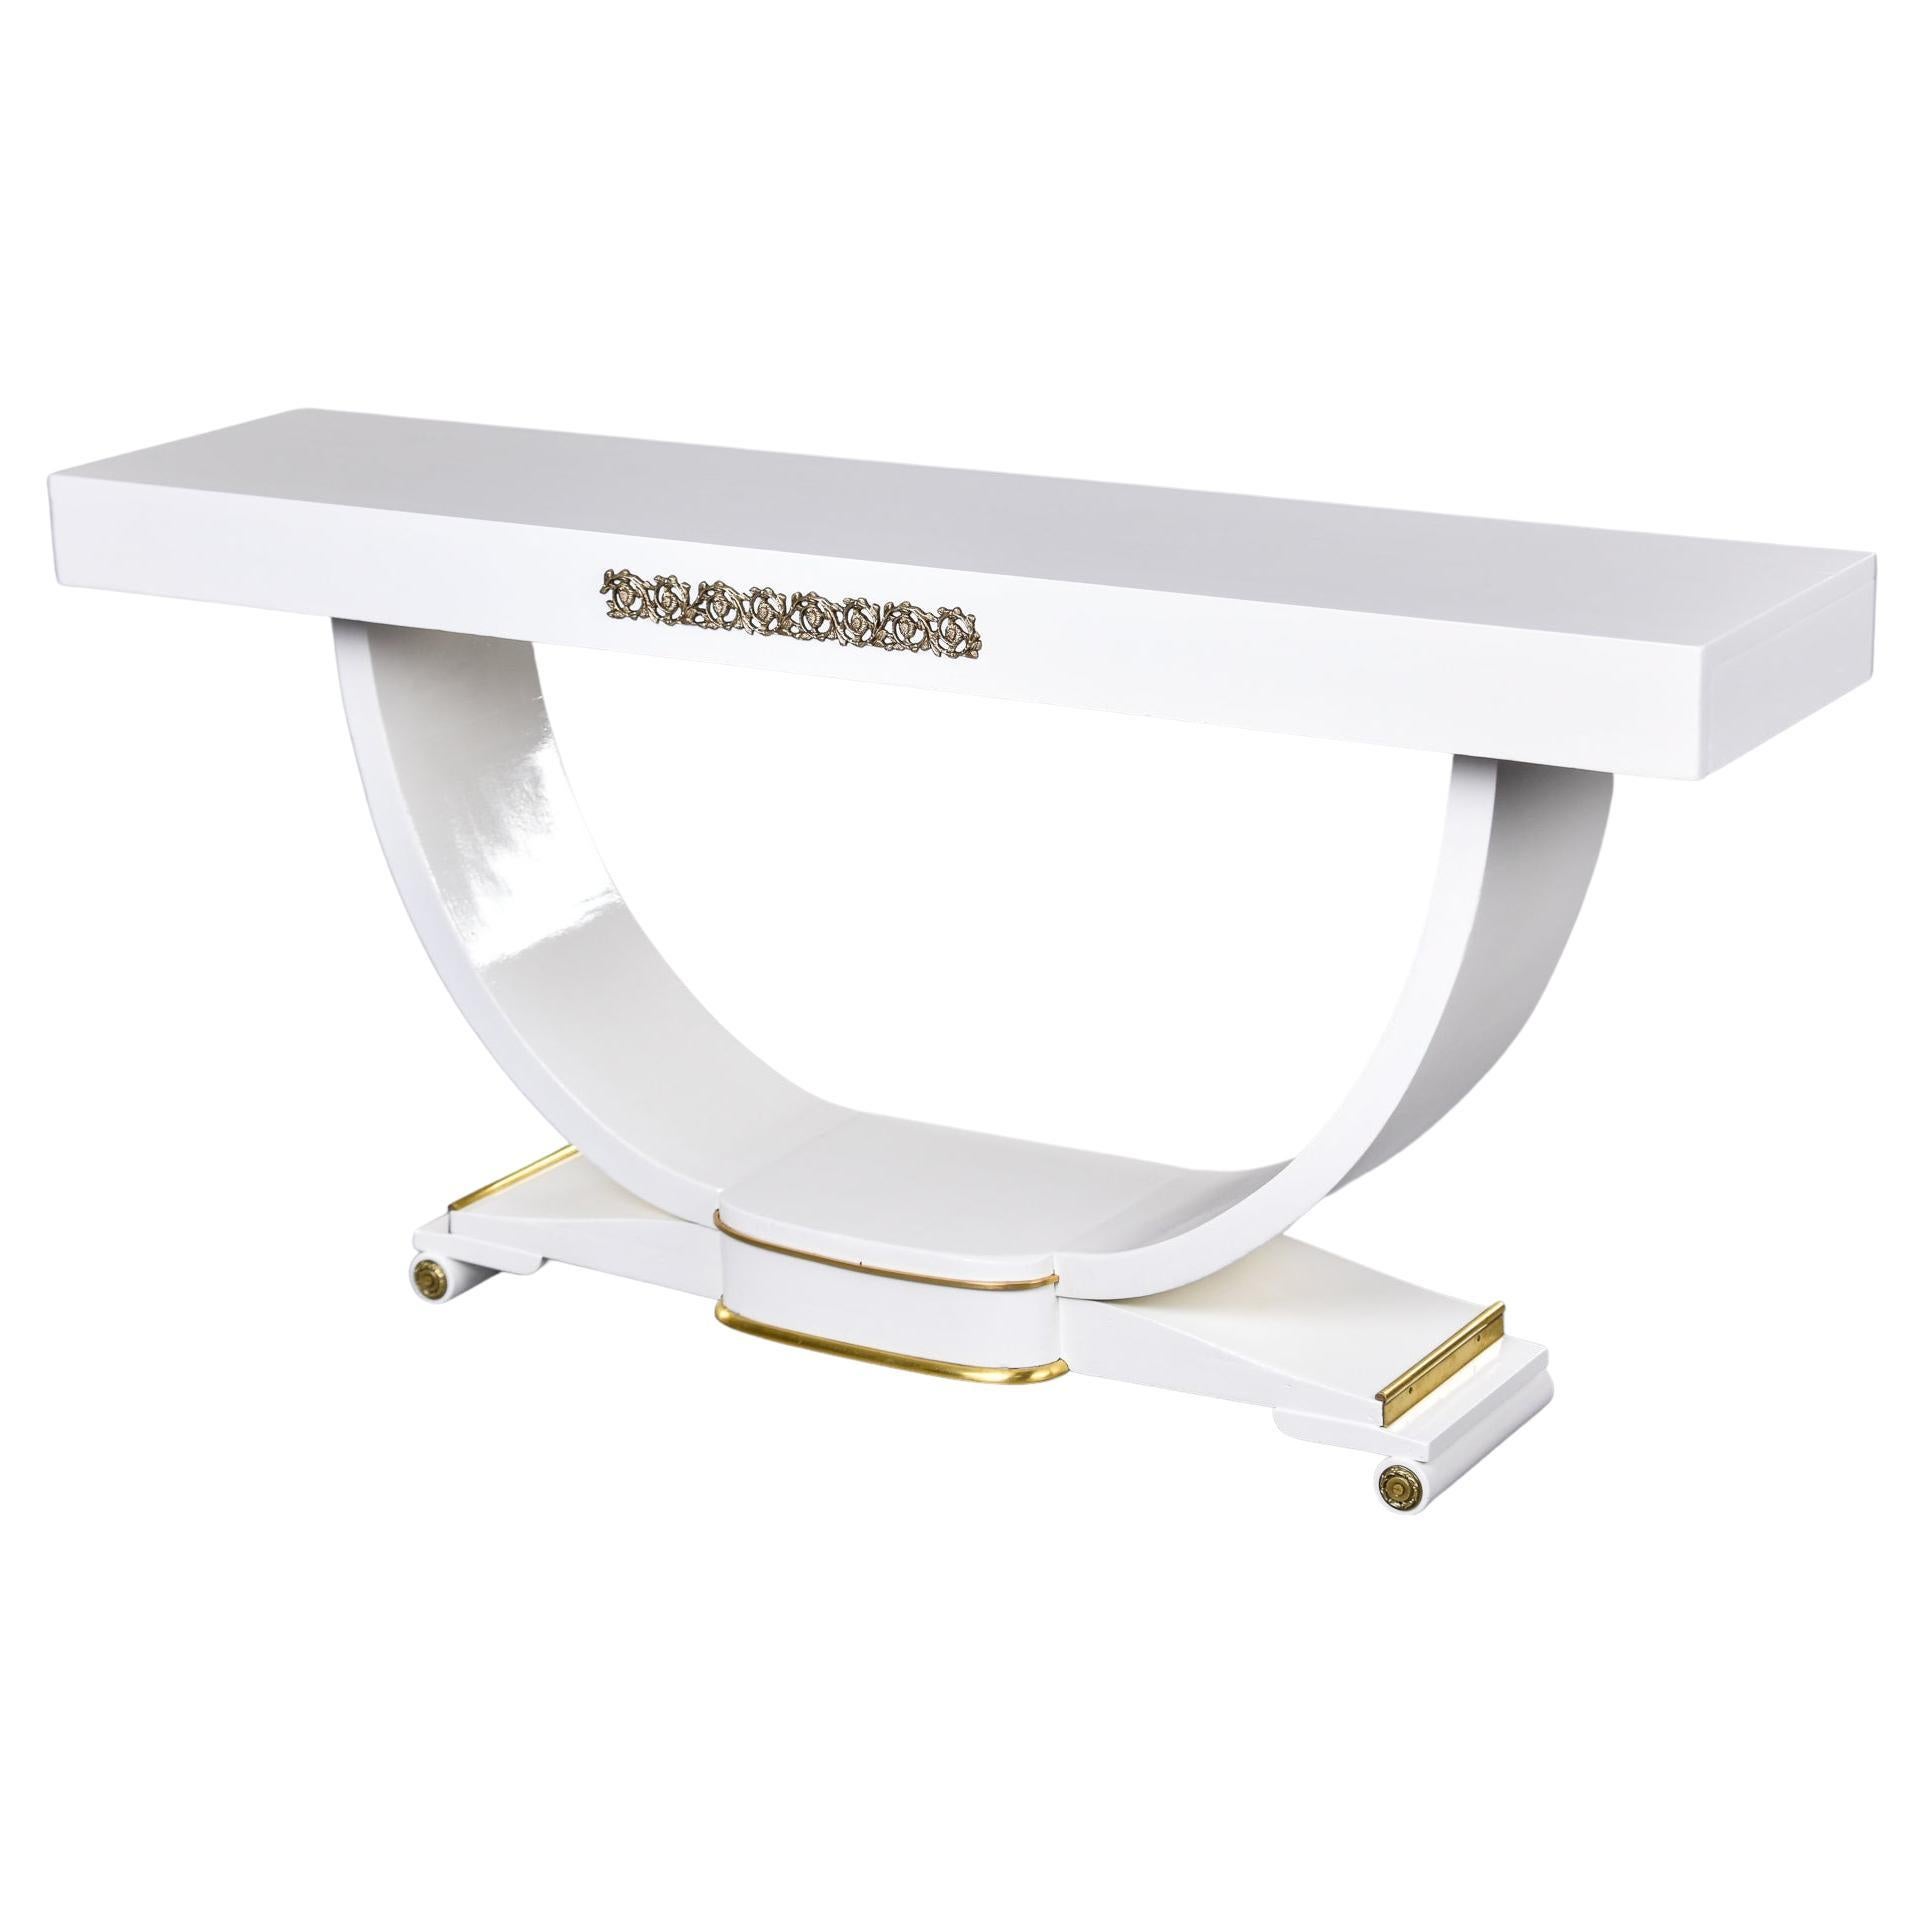 French Art Deco Console in White Finish with Brass Detailing